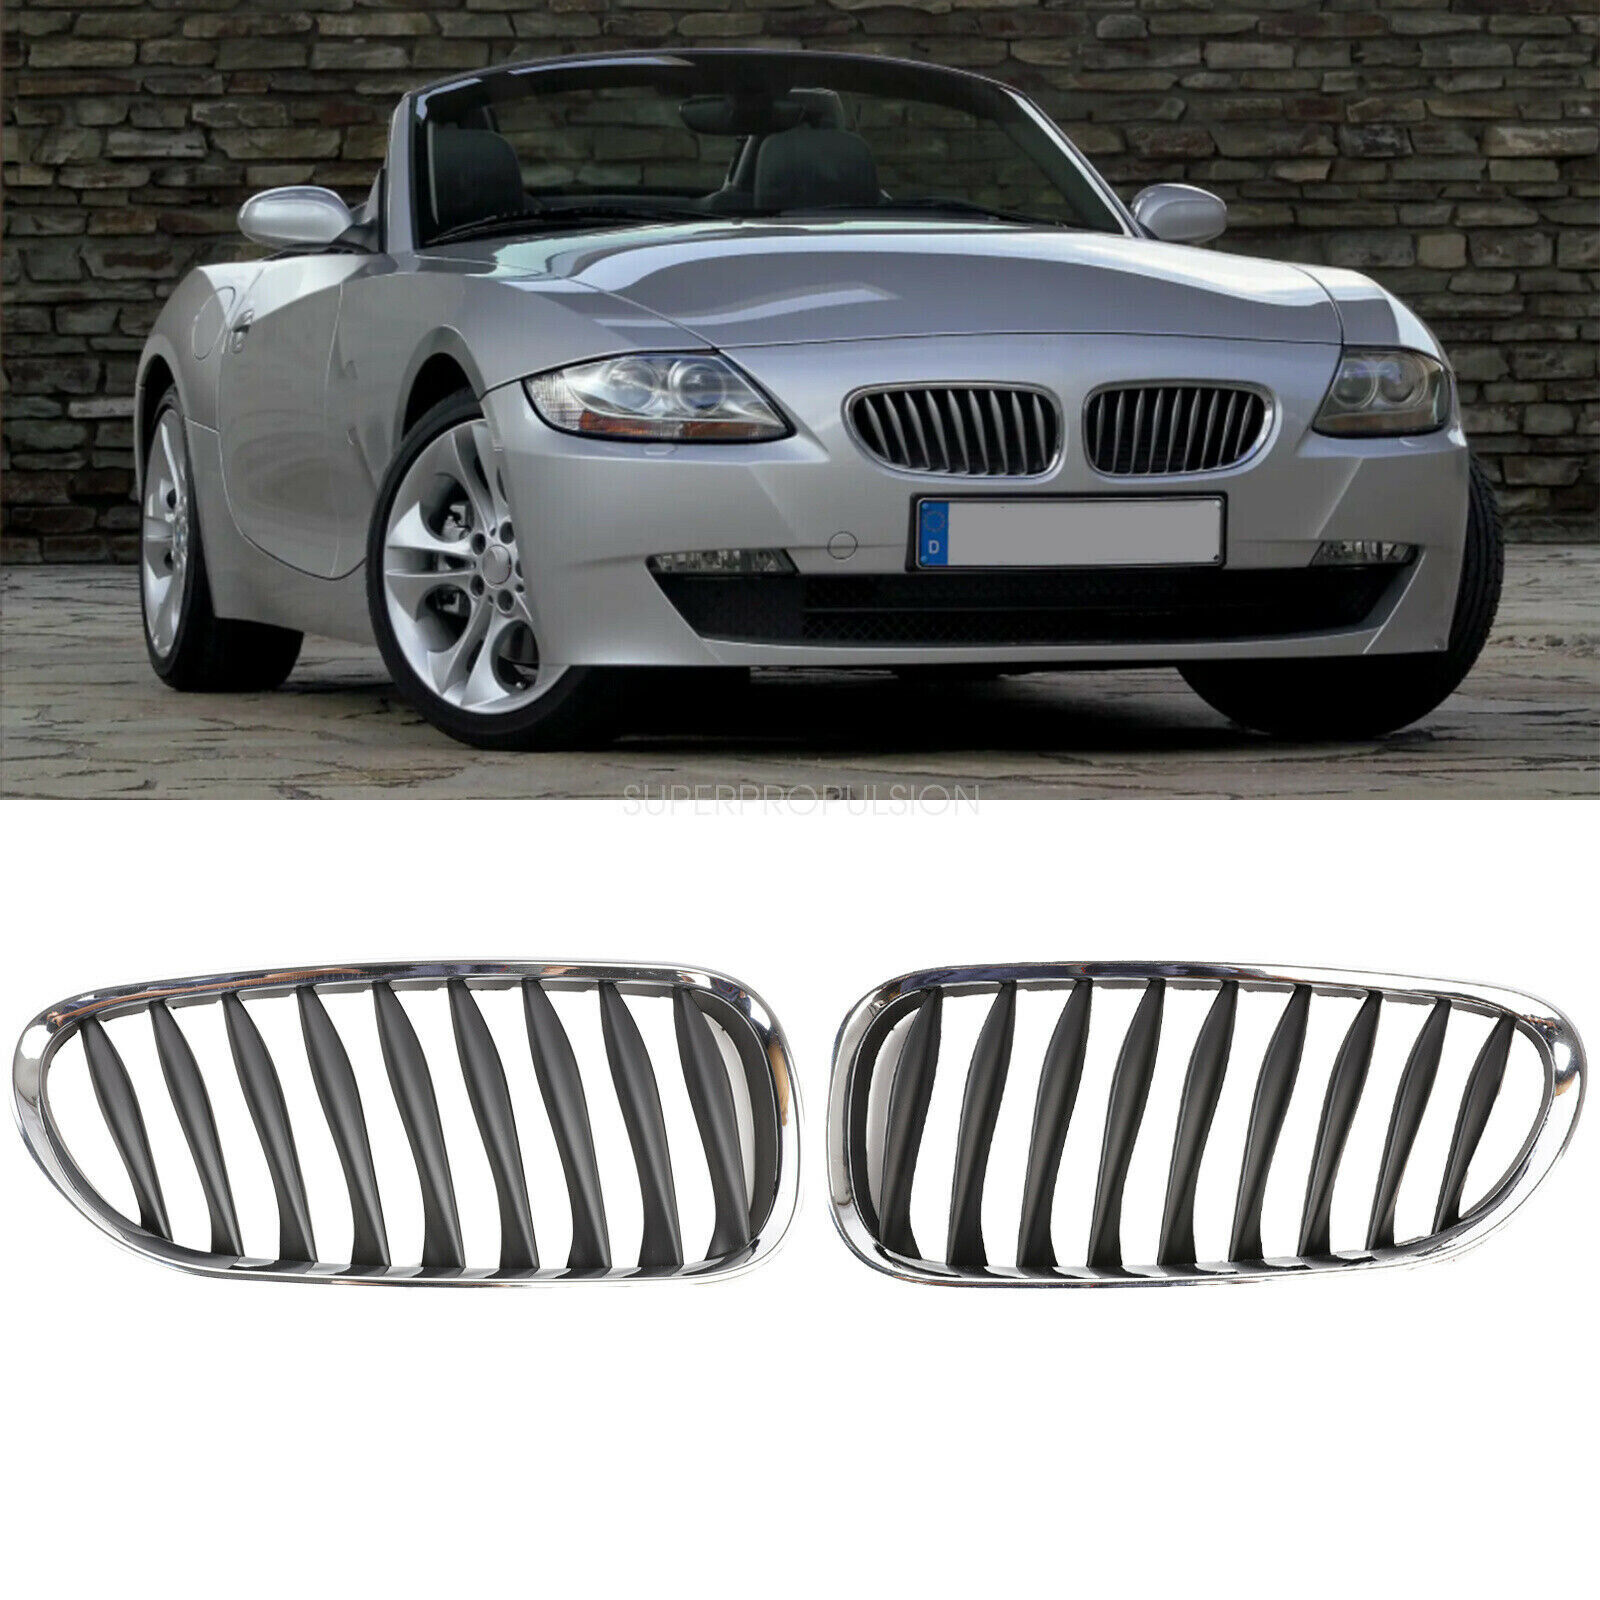 2x Chrome Front Kidney Grilles Grills For BMW Z4 Coupe E85 2003-09 Convertible